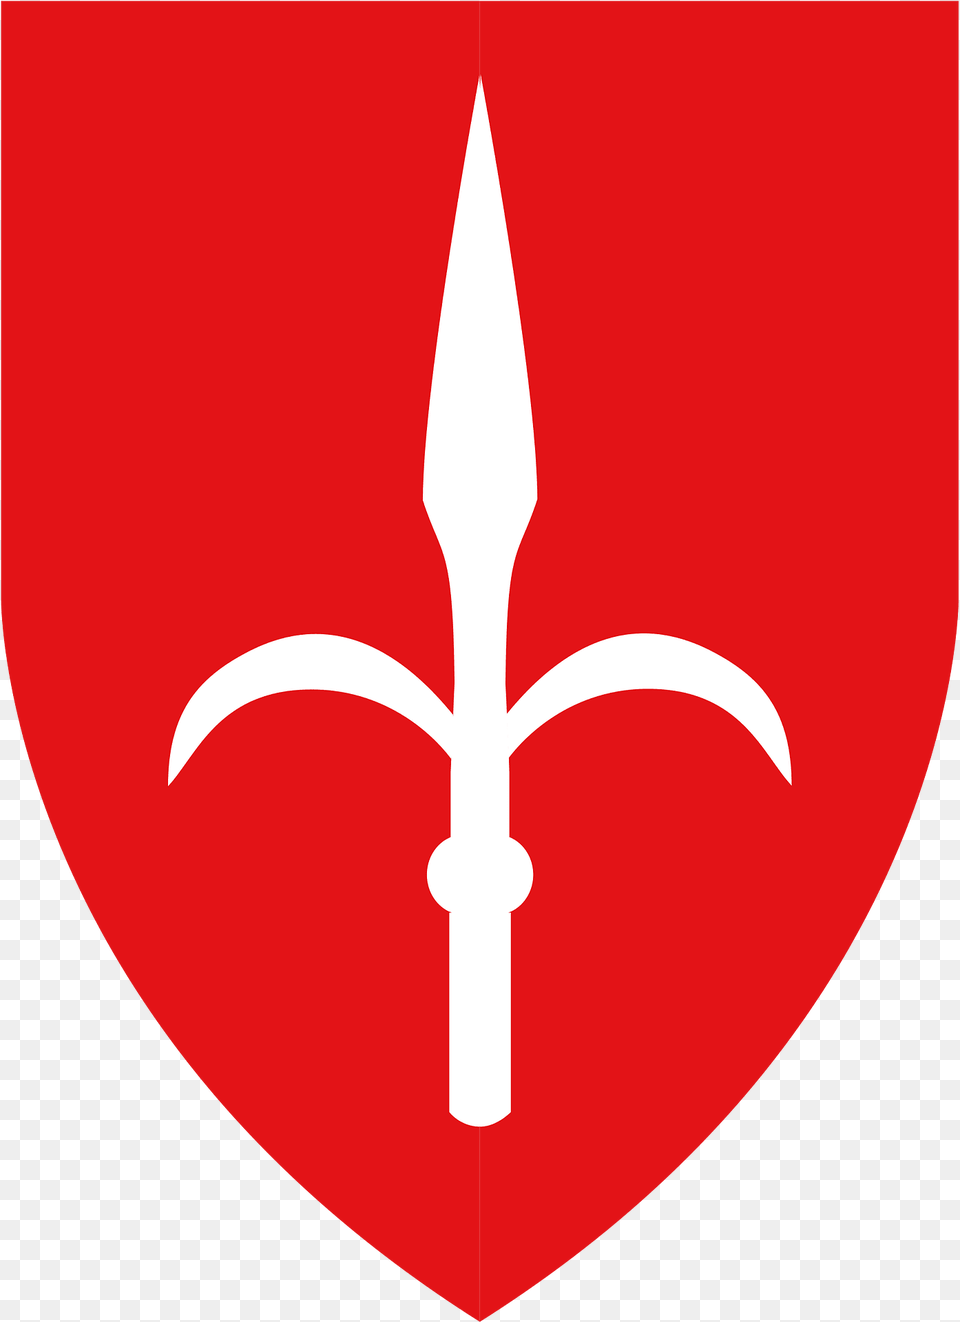 Territory Of Trieste Coat Of Arms Clipart, Weapon, Sword Free Transparent Png